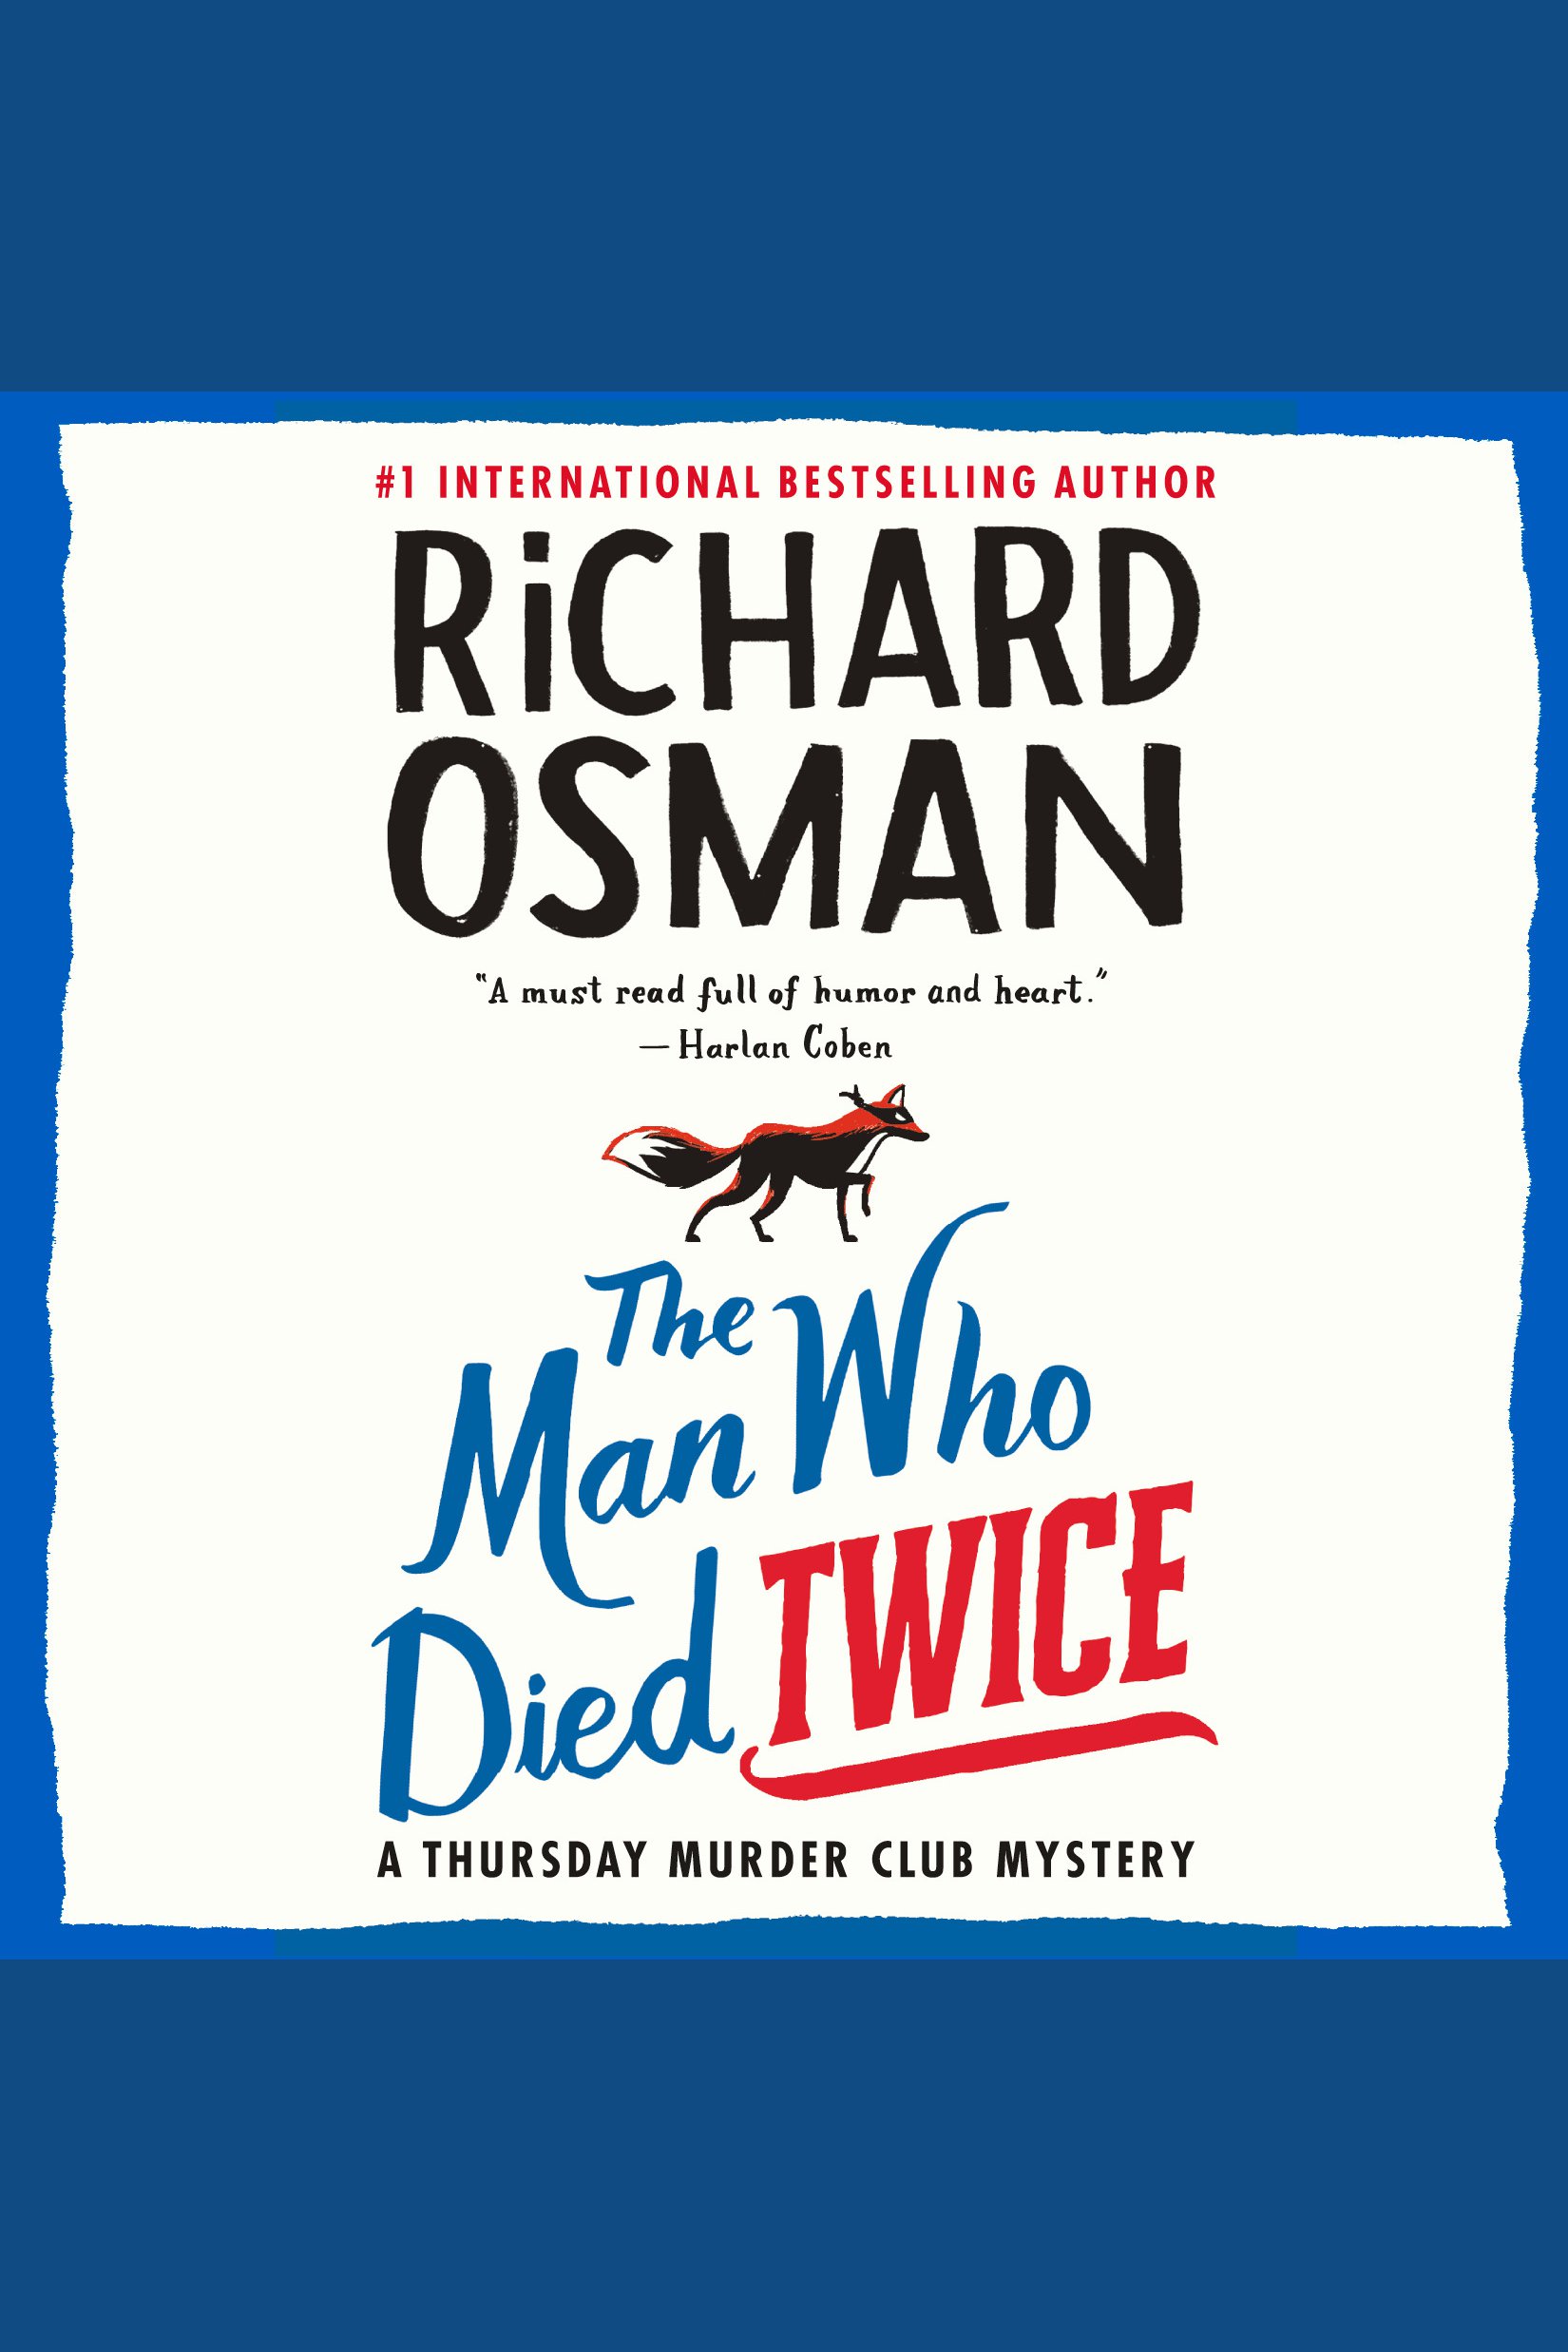 The Man Who Died Twice cover image